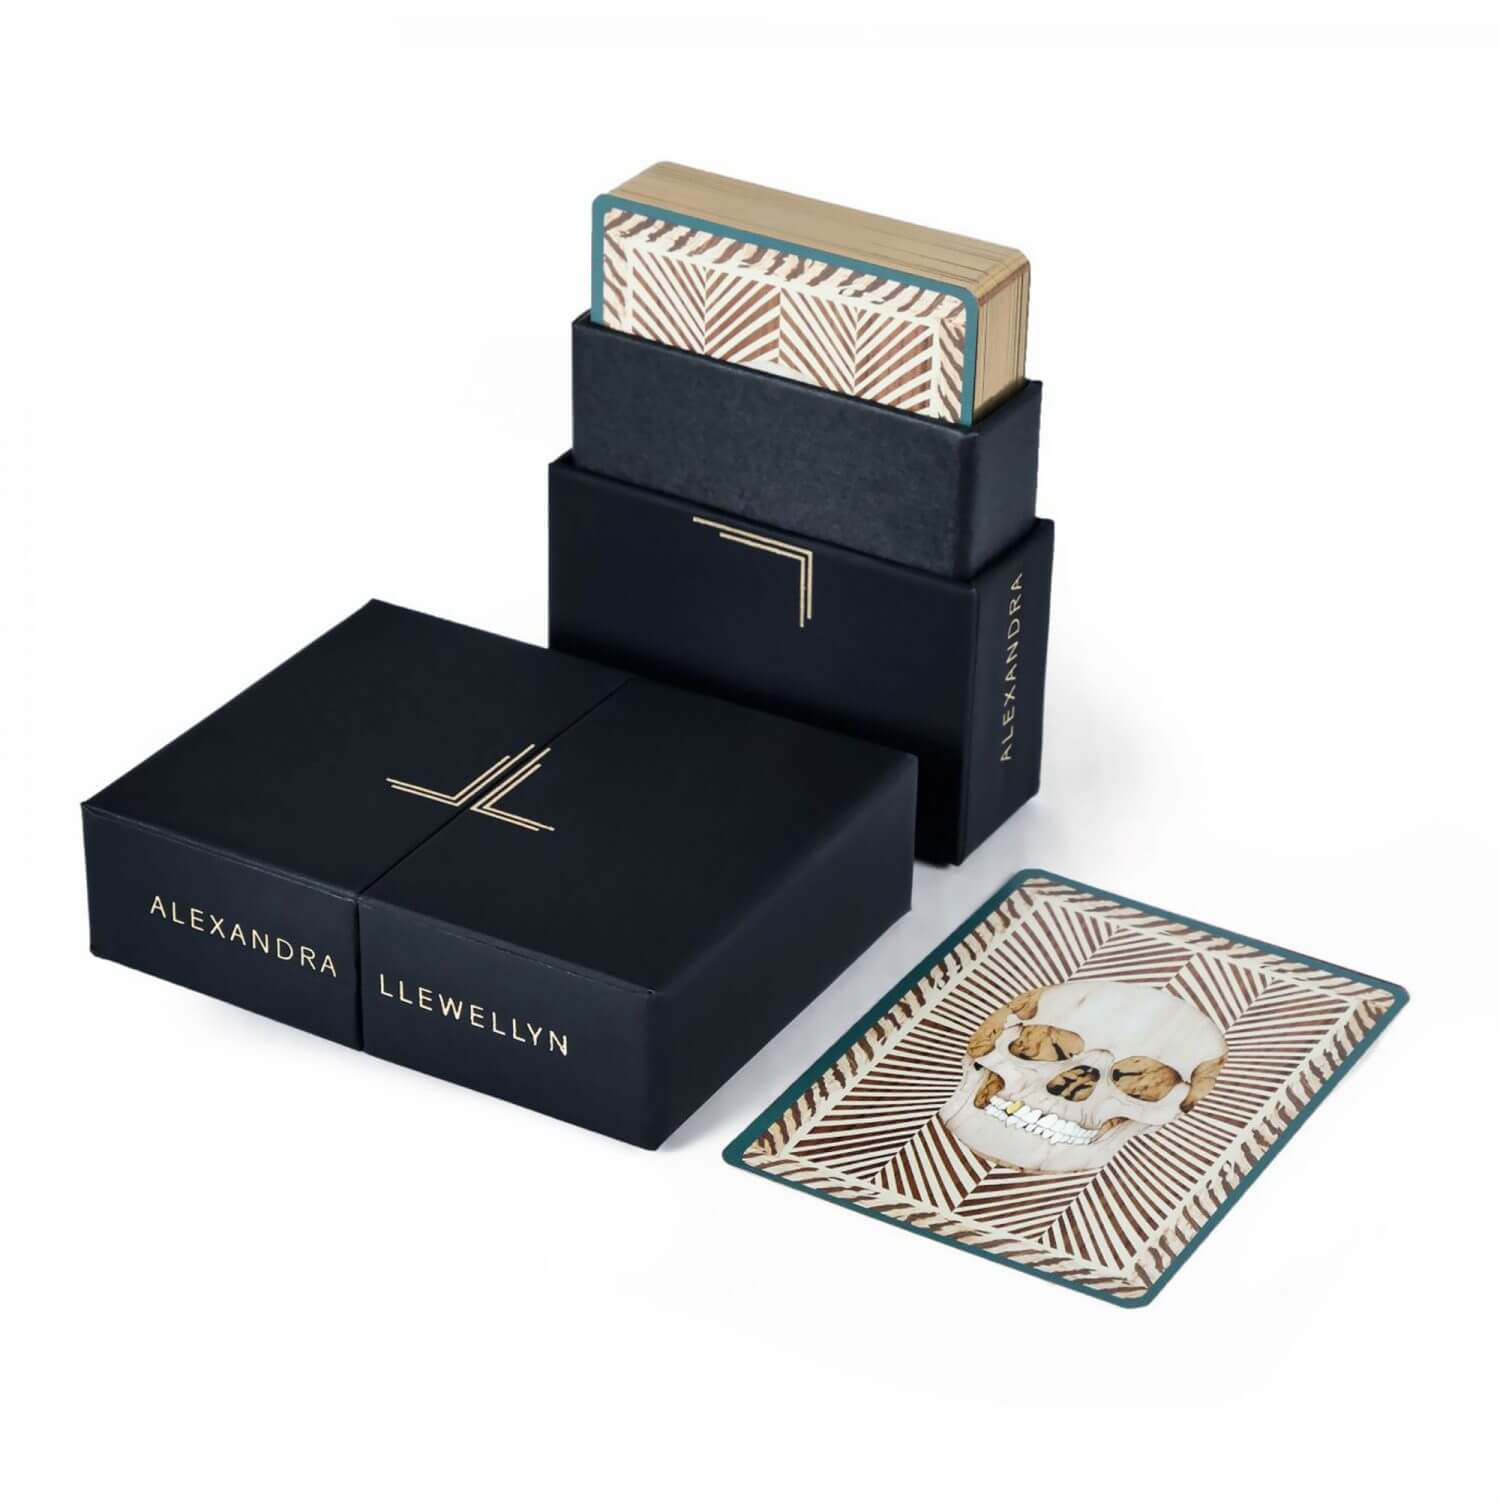 Playing cards with skull design and branded presentation box